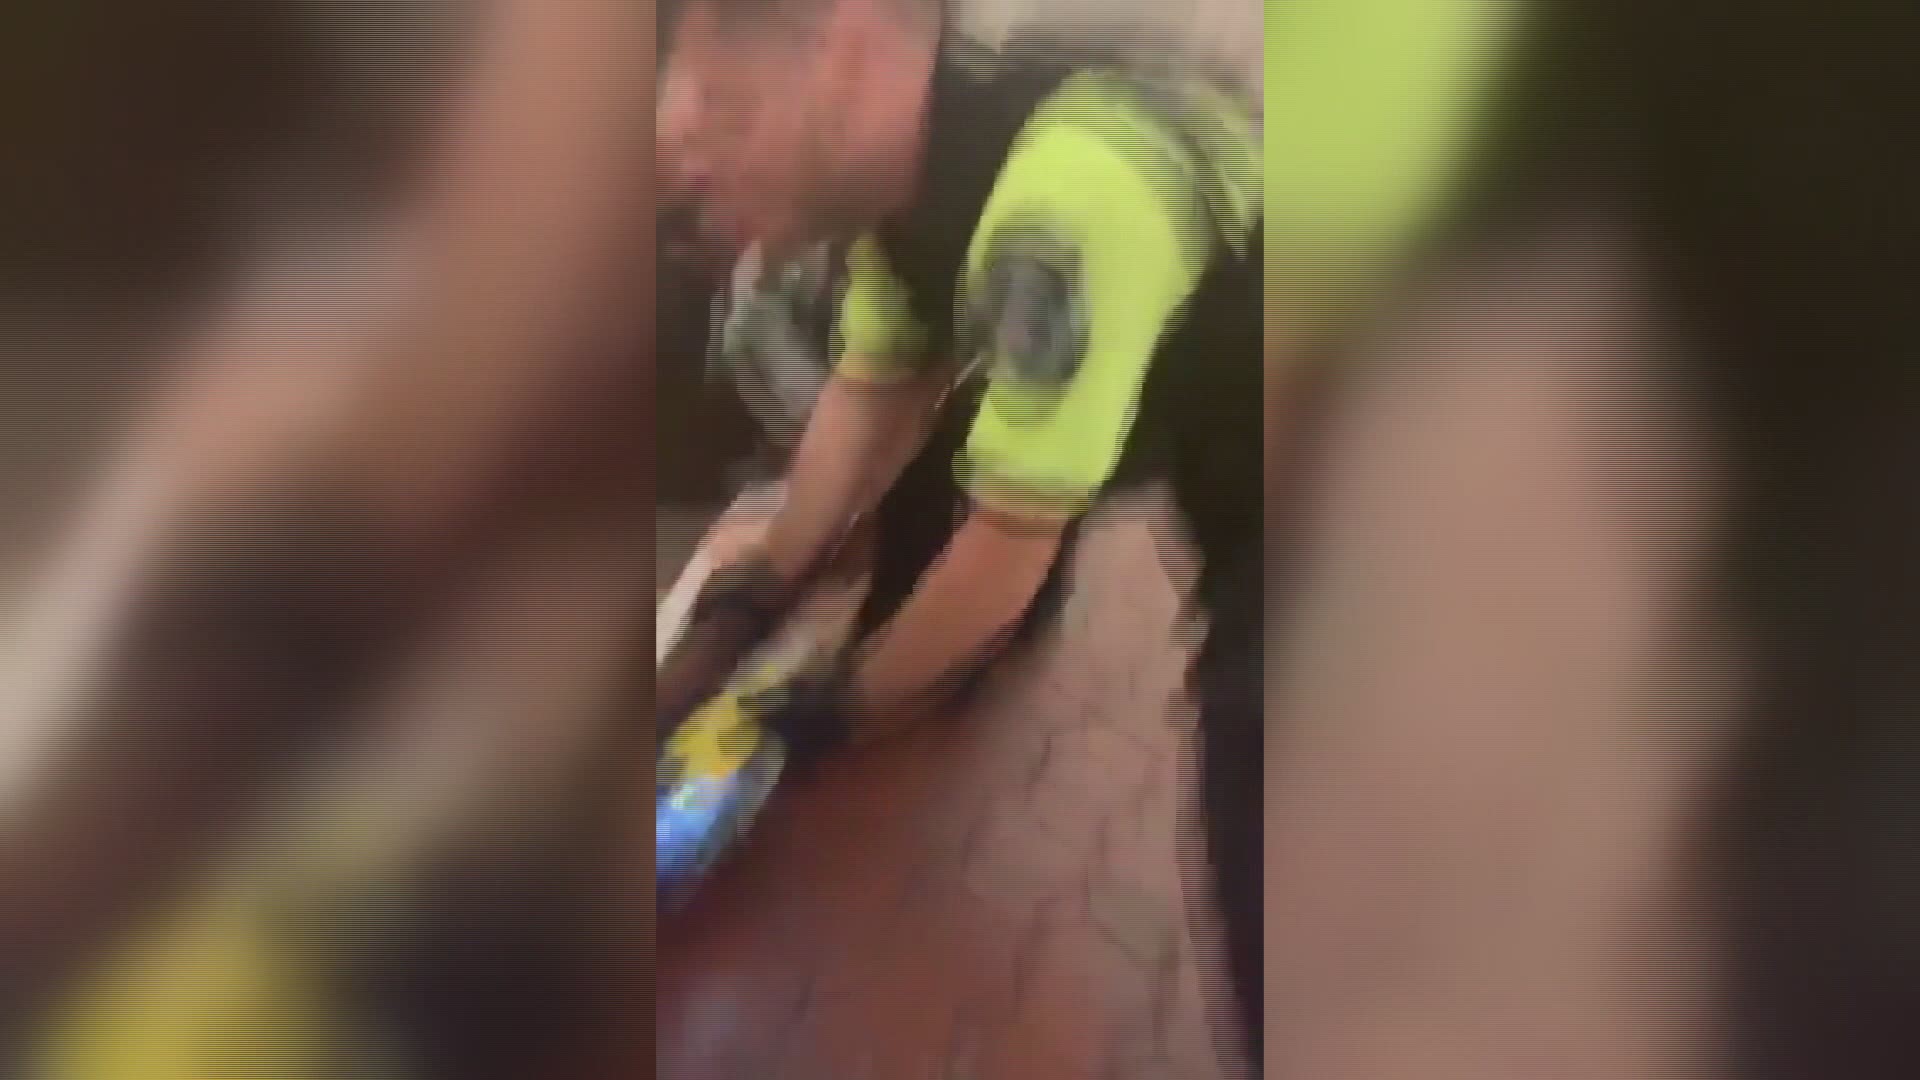 Three metro transit police officers are being sued after a video blew up online.

The footage, which was recorded in June 2019, shows a man getting tased and arreste